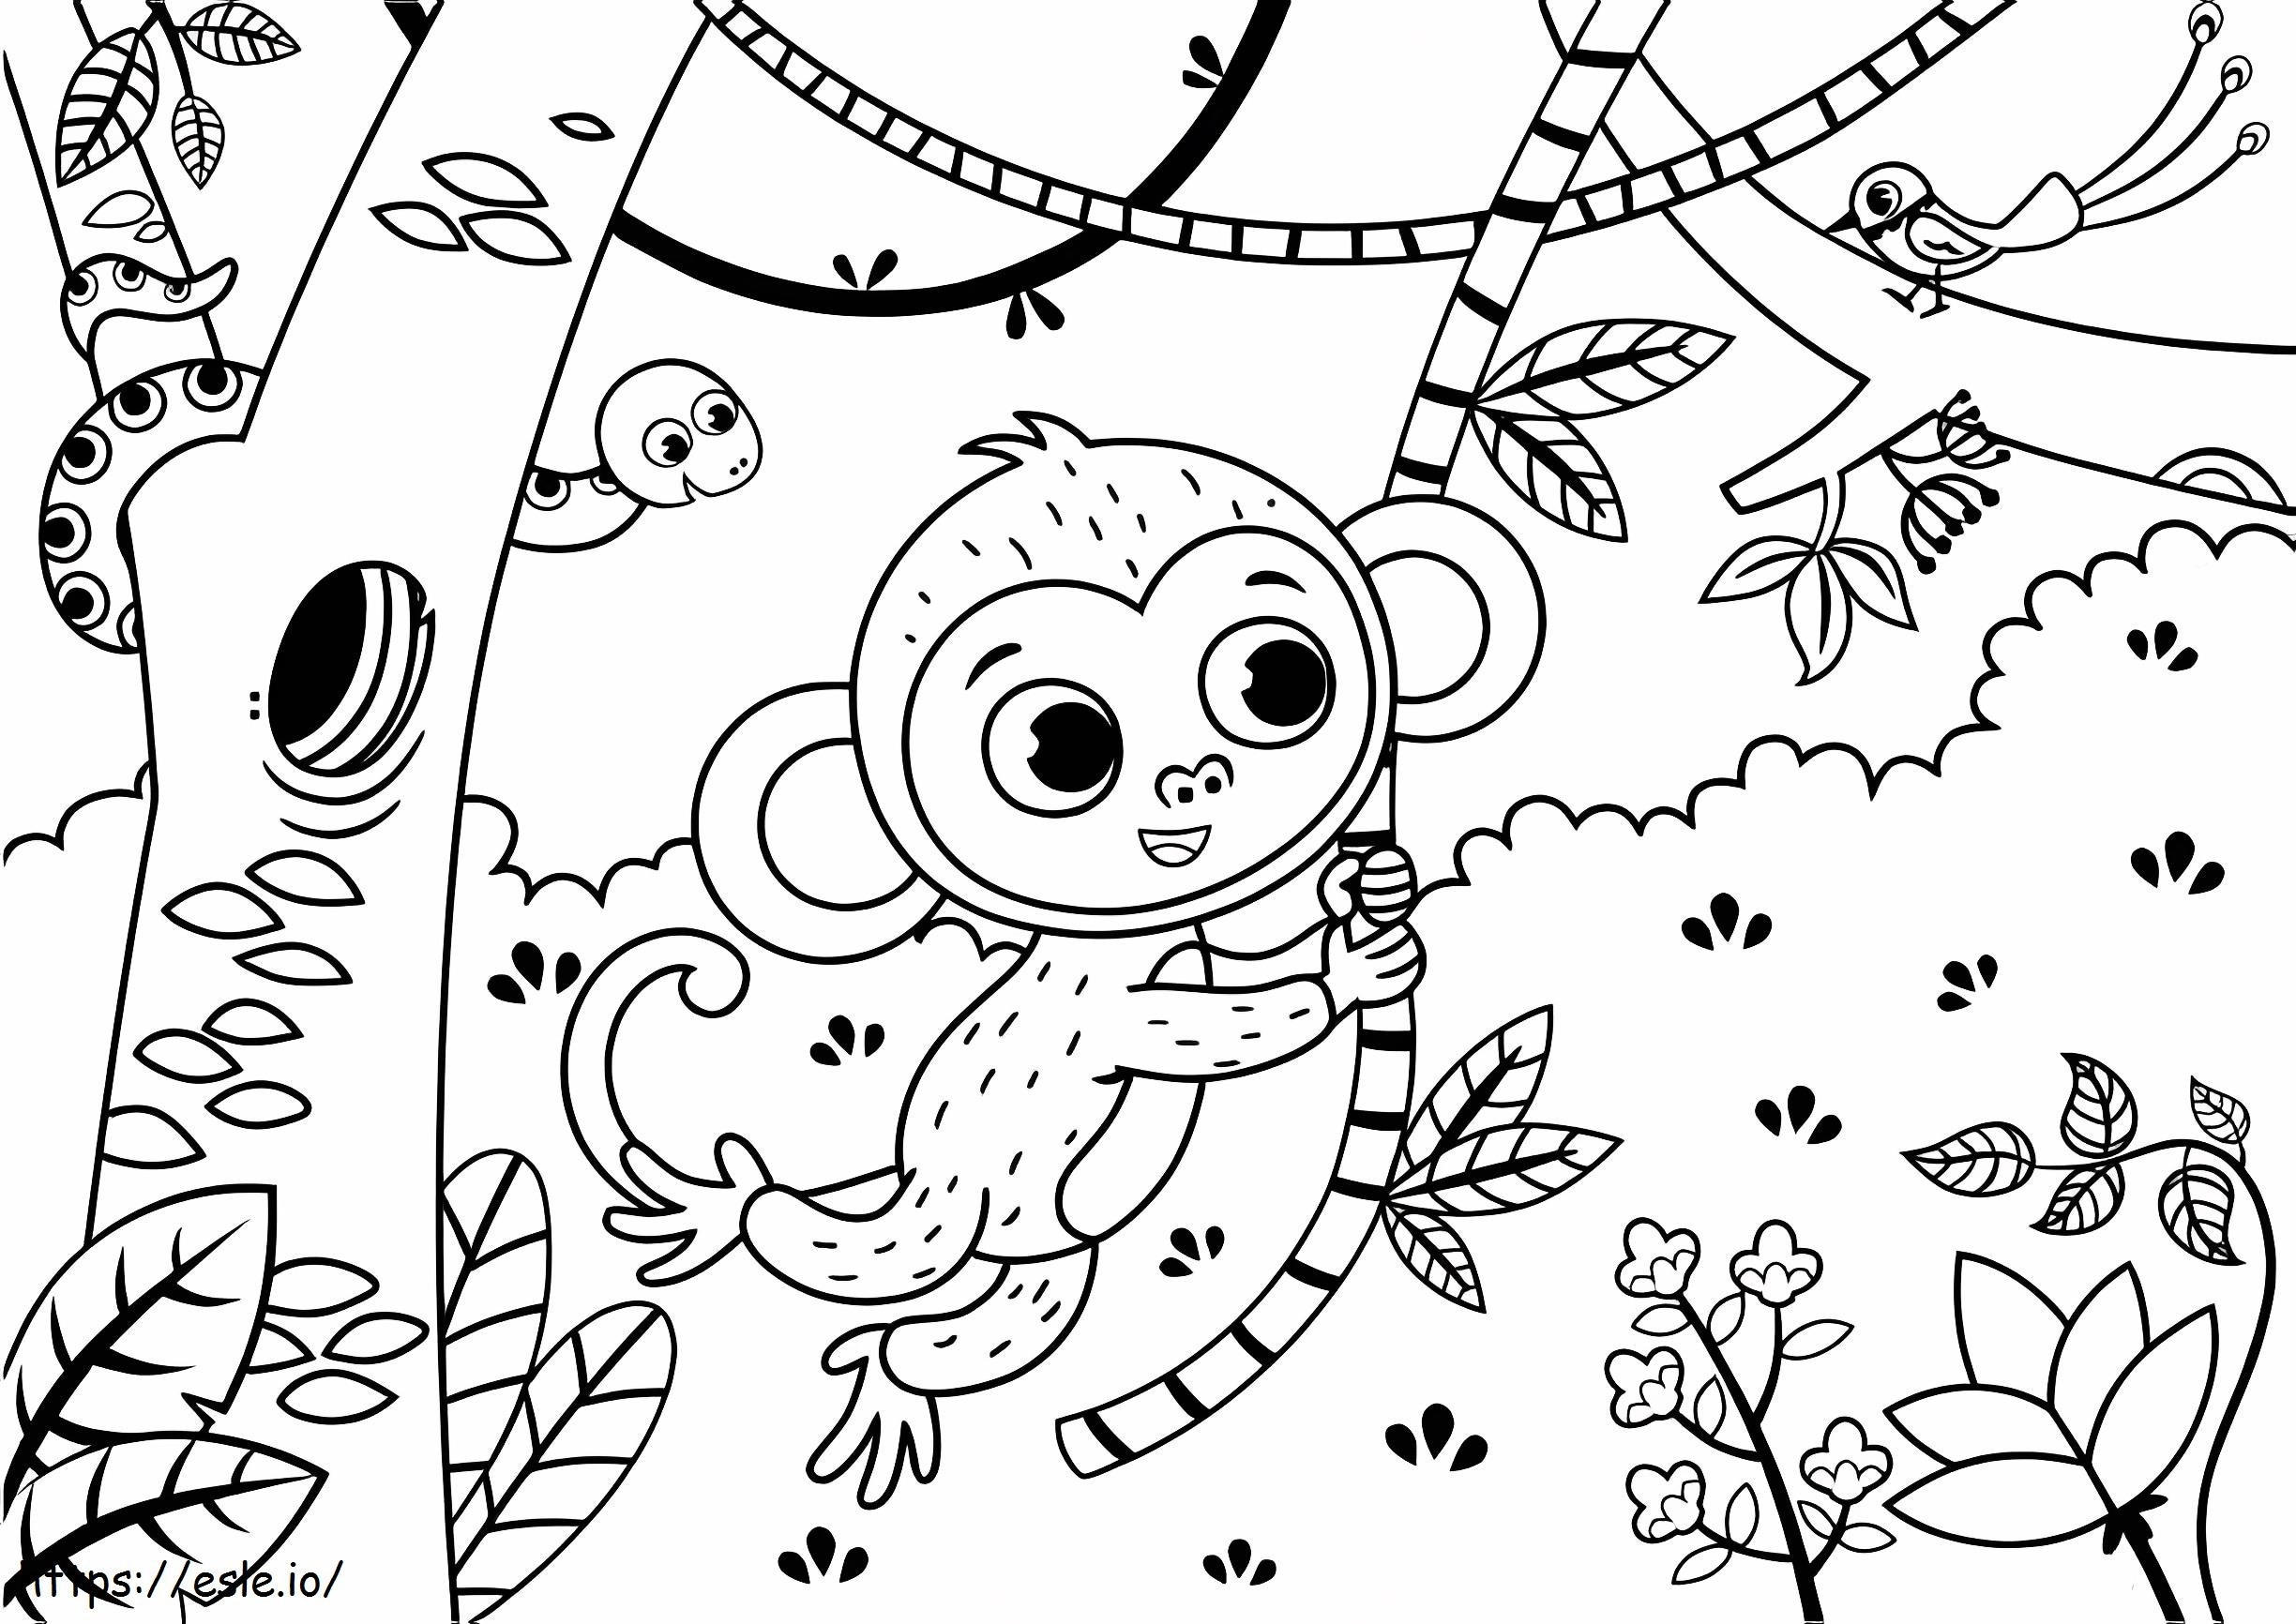 Cute Monkey Climbing Tree coloring page